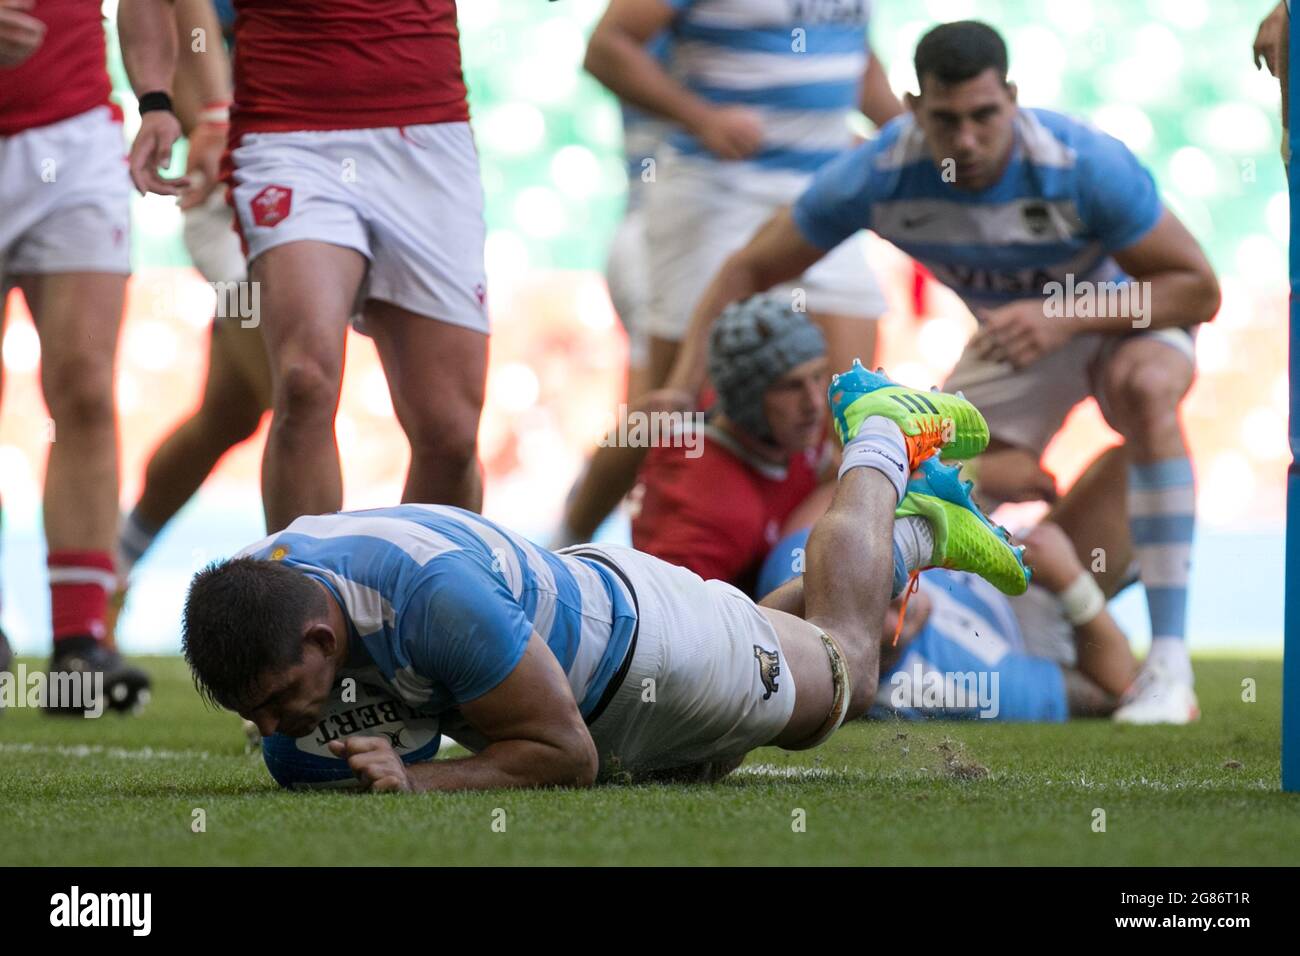 Cardiff, UK. 17th July, 2021. Cardiff, UK. July 17th : Pablo Matera (Argentina) controls the ball during the 2021 Summer Internationals match between Wales and Argentina at Principality Stadium. Credit: Federico Guerra Morán/Alamy Live News Stock Photo